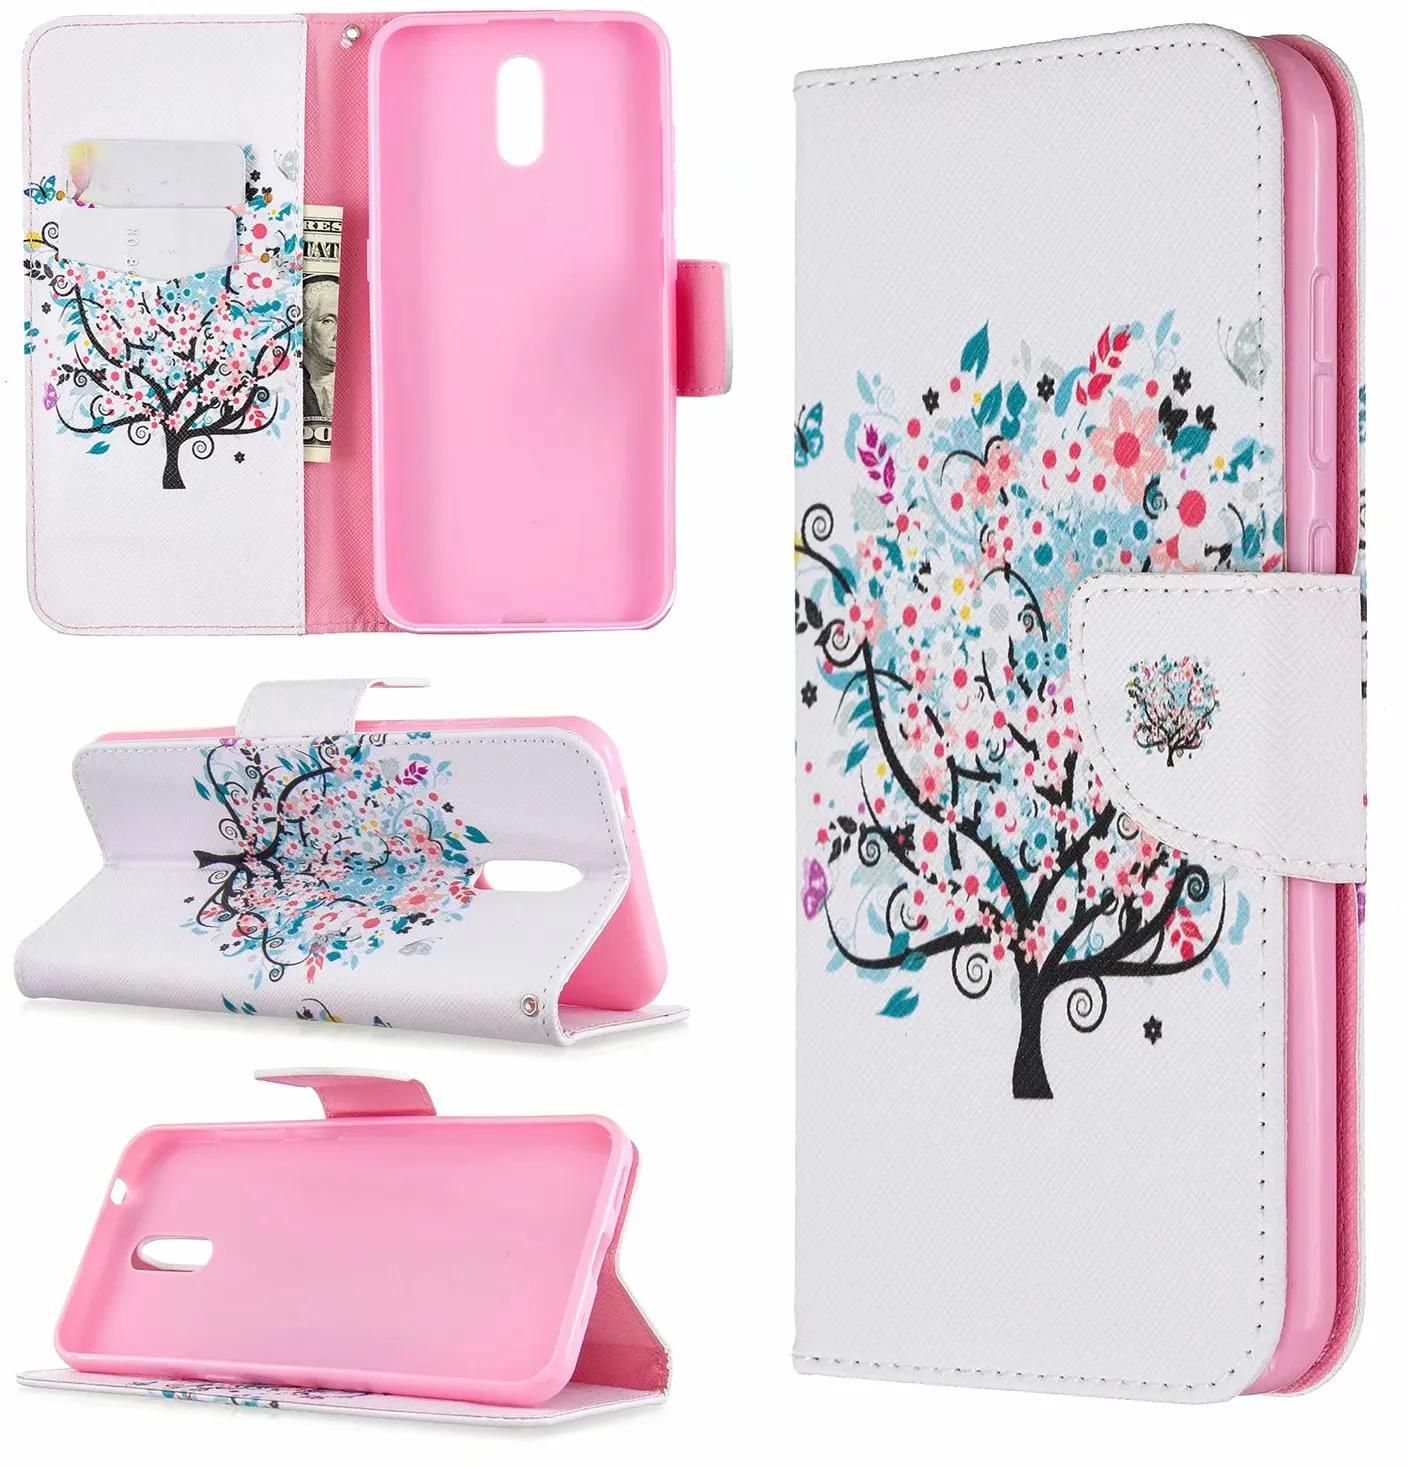 Nokia 2.3 Case, Flip PU Leather Wallet Phone Bag Cover for Nokia 2.3 - Color tree